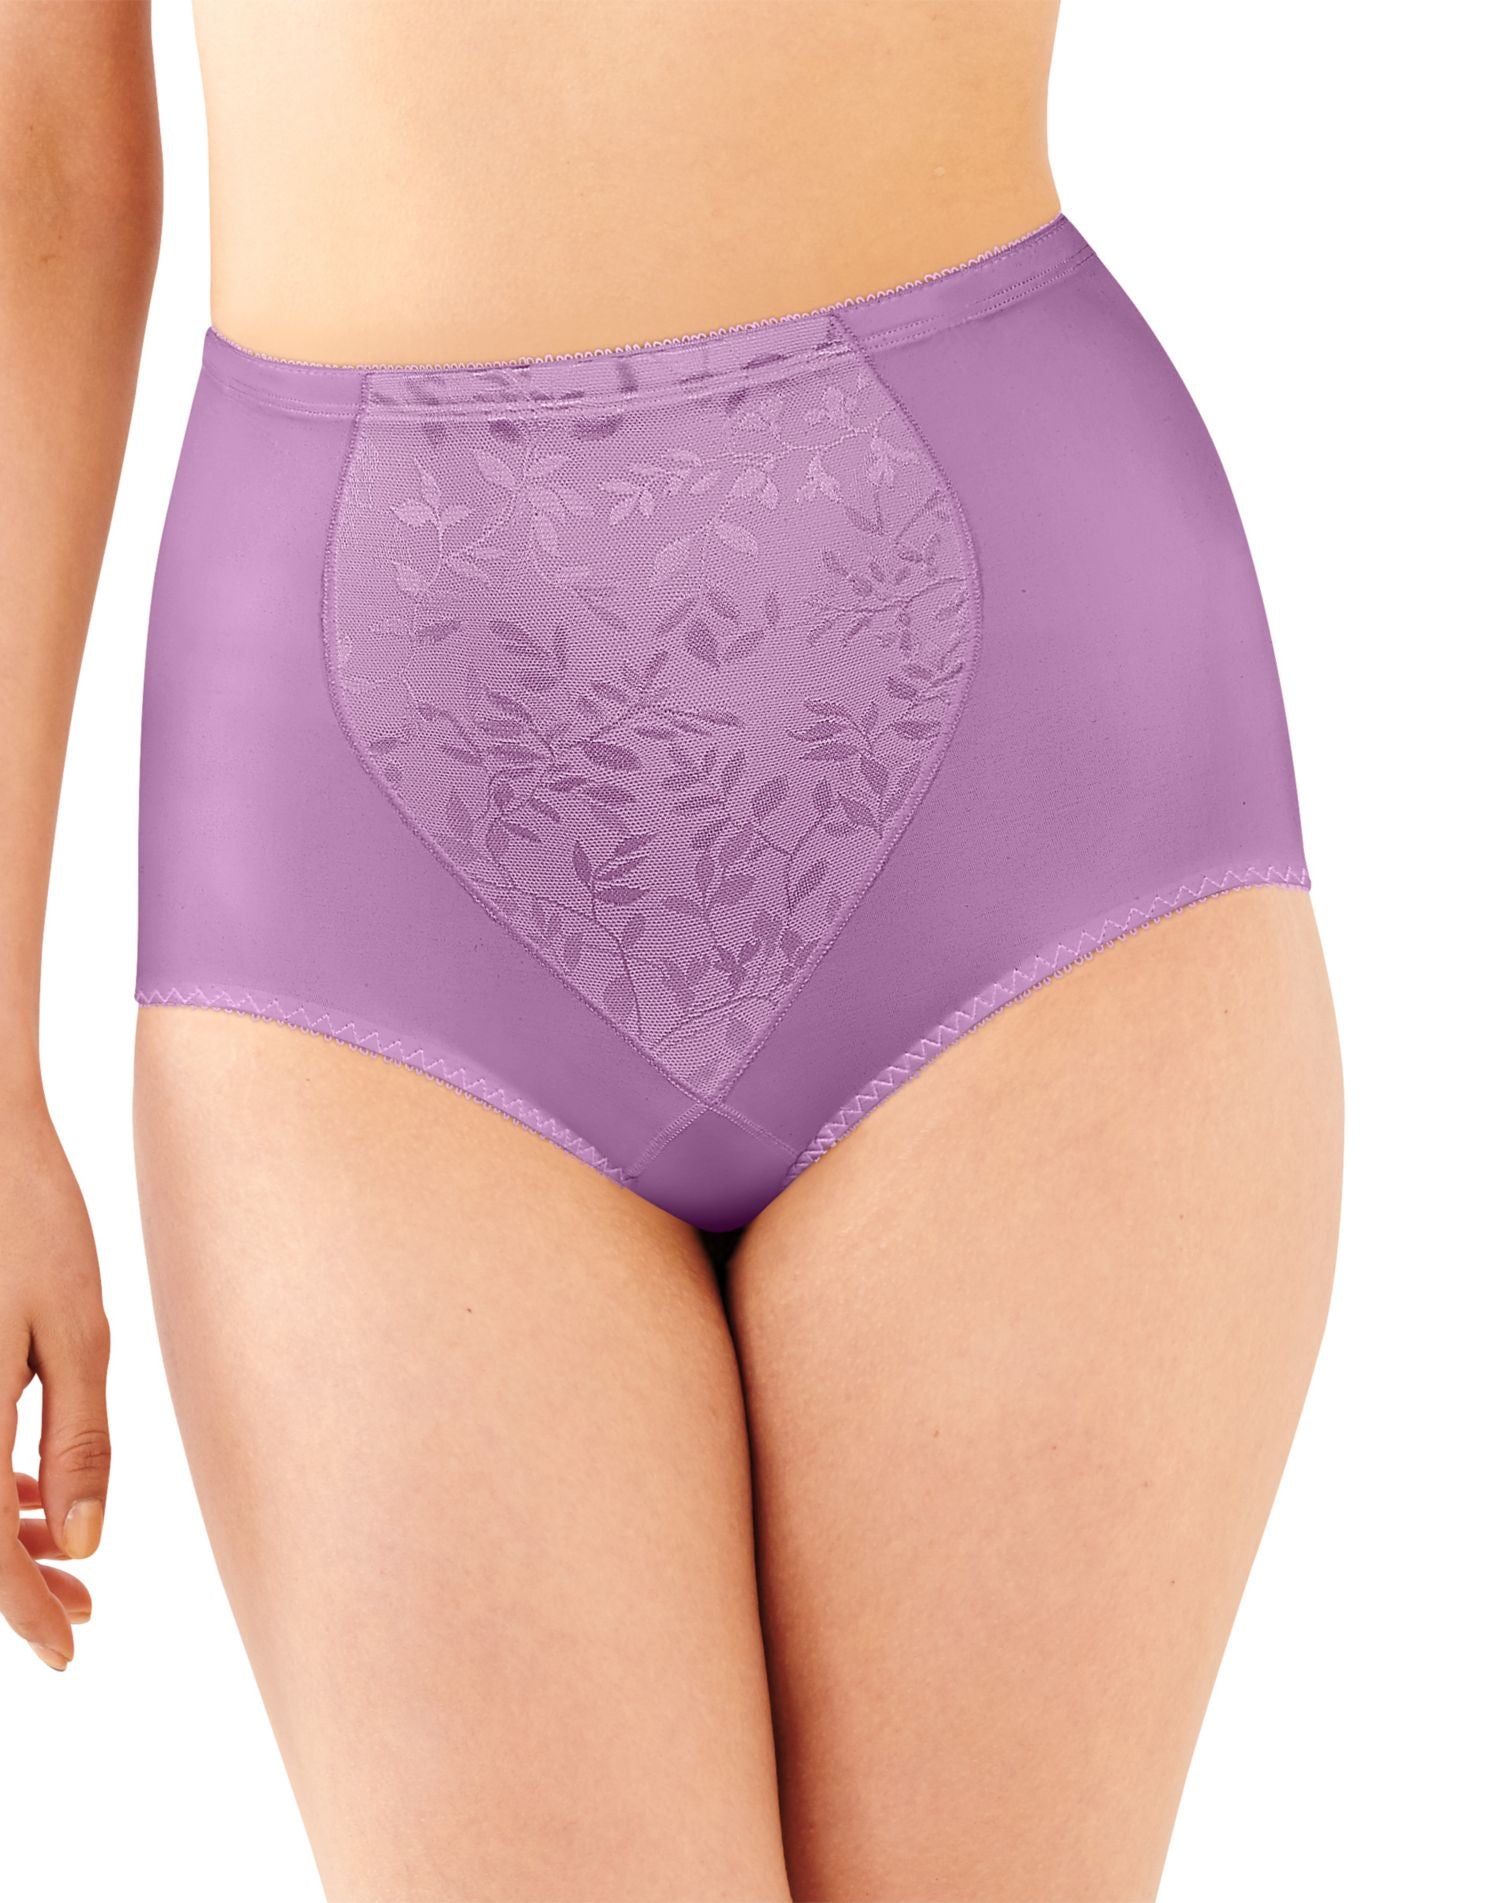 Double Support Brief Panty - 3 Pack